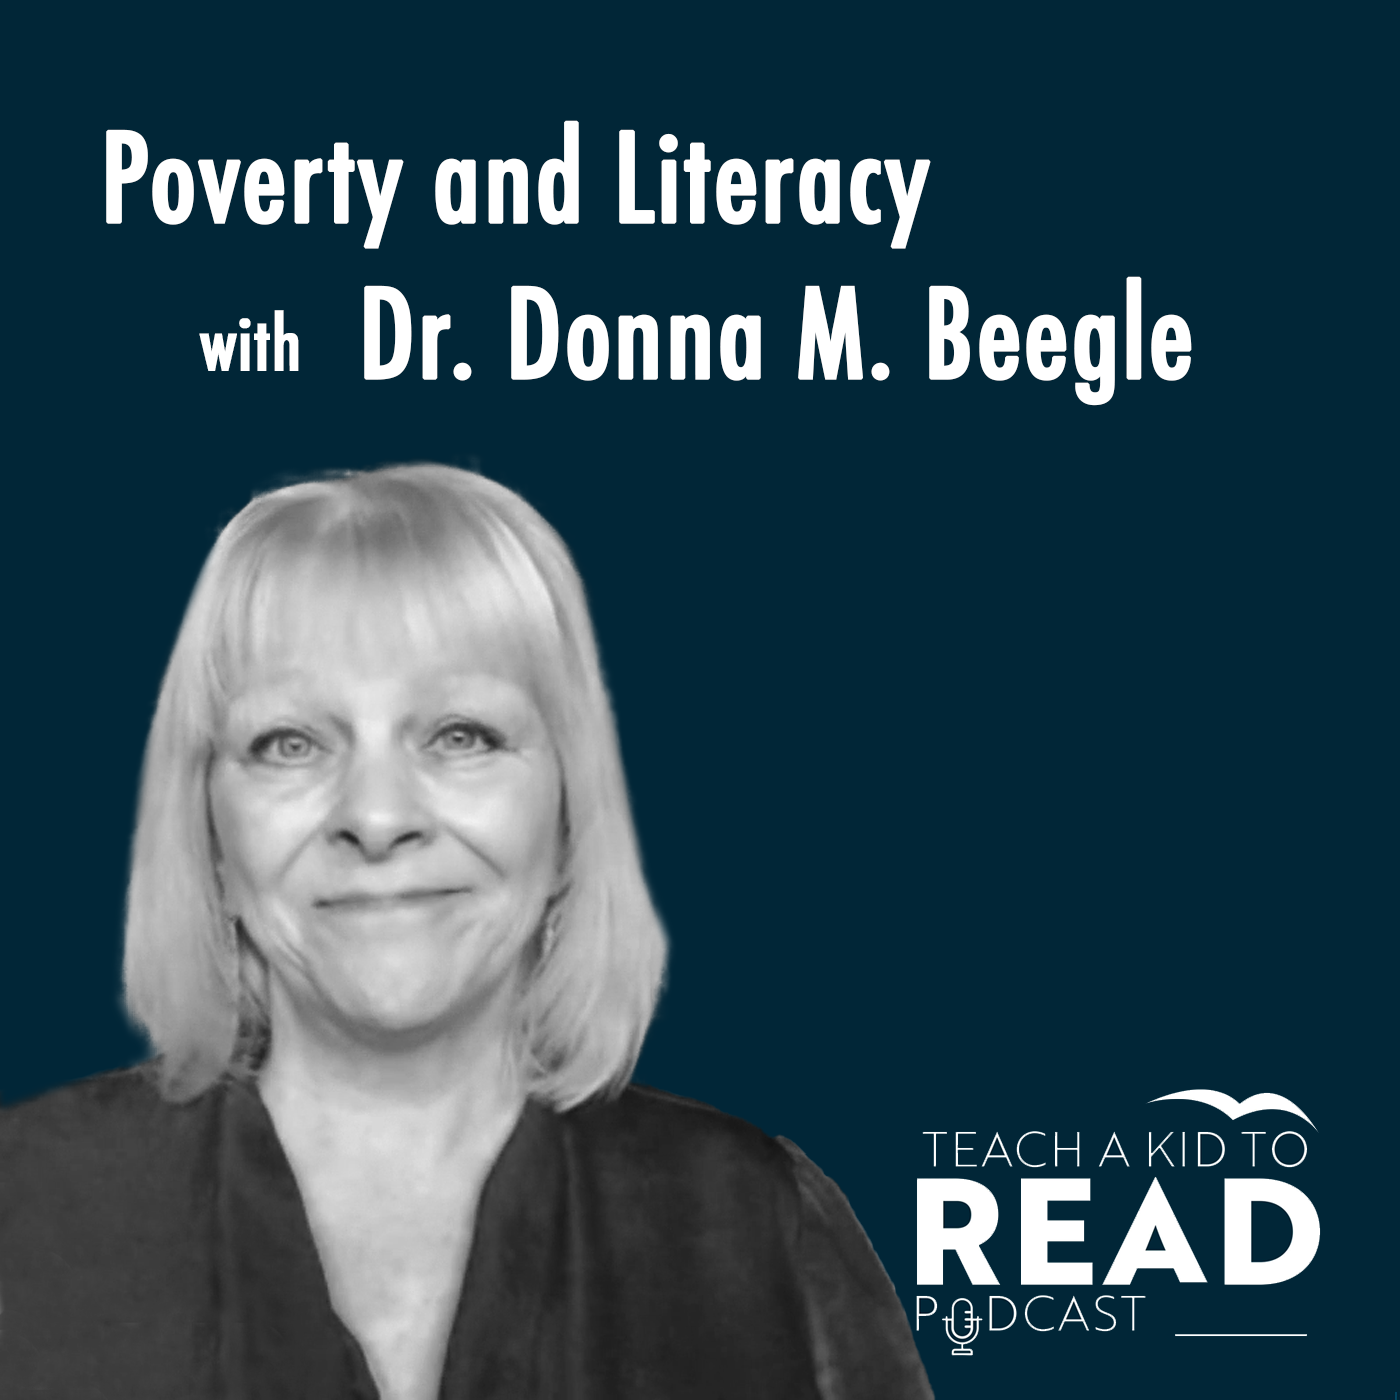 Poverty and Literacy with Dr. Donna M. Beegle